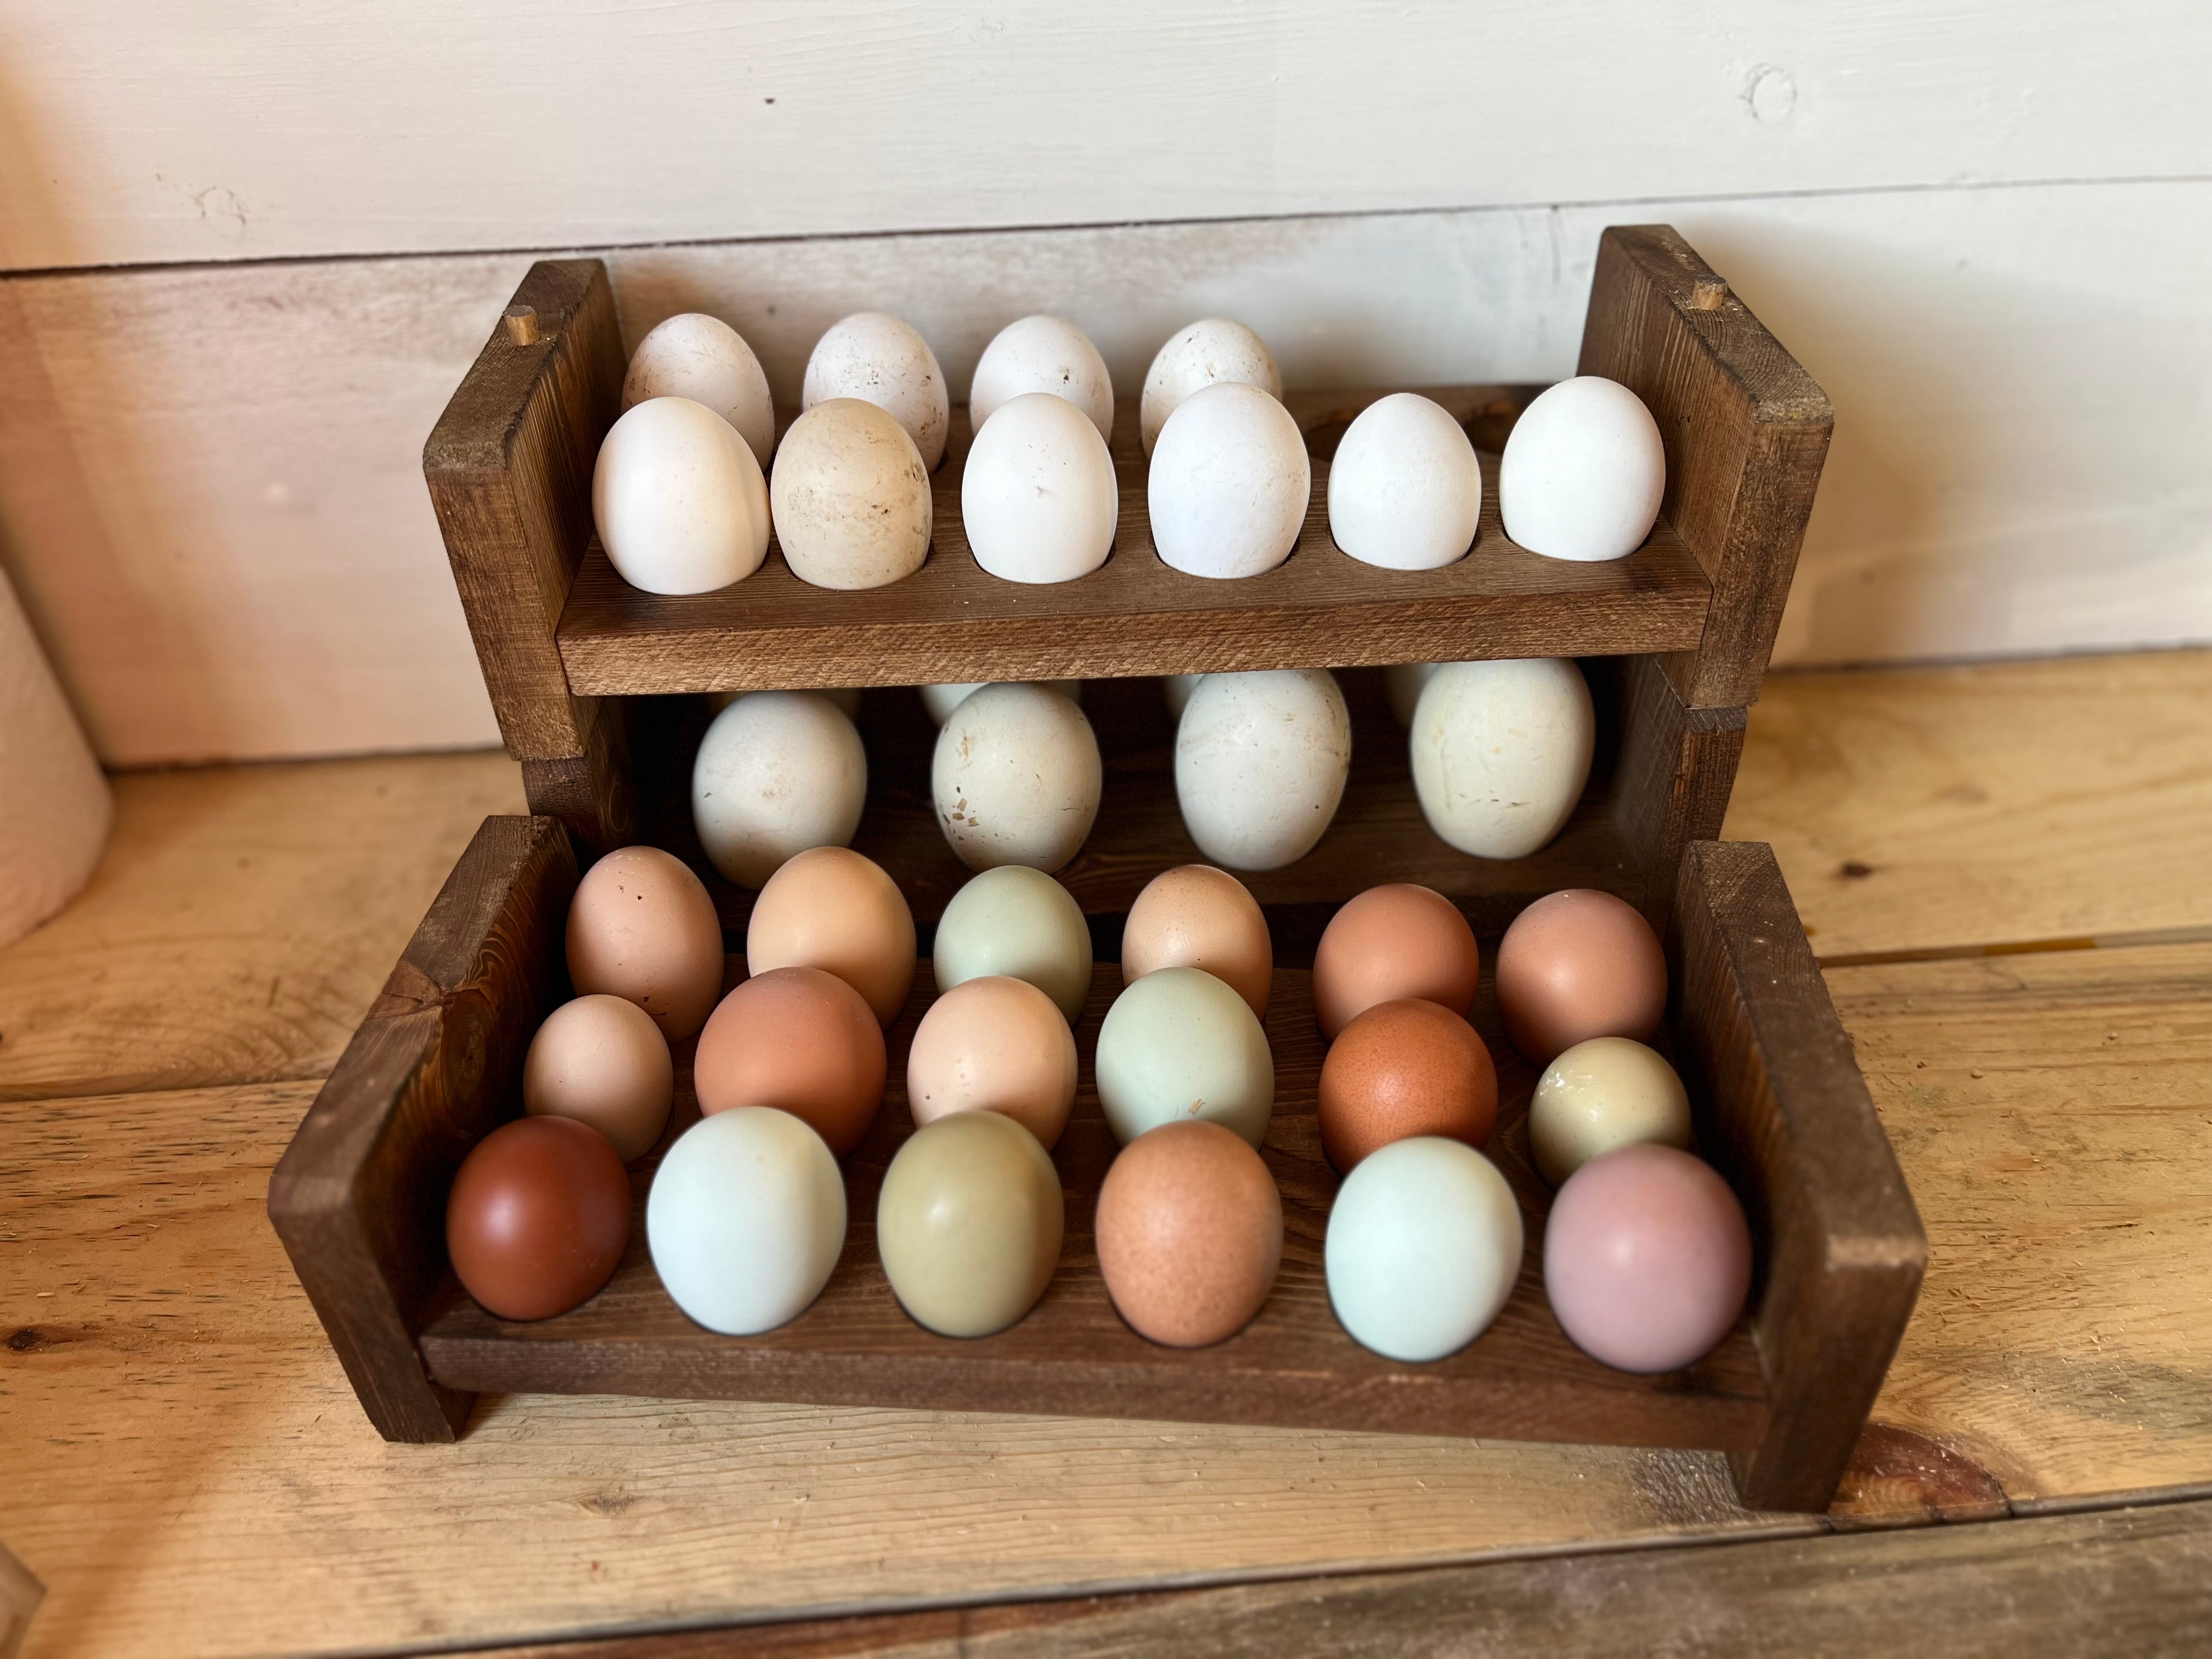  Egg Basket for Fresh Eggs, Fabric Egg Collecting Basket Bags  with 7 Pouches Portable Eggs Holder Bag for Chicken Hen Duck Goose Eggs  Family Garden Farms Egg Collecting Basket Egg Collecting